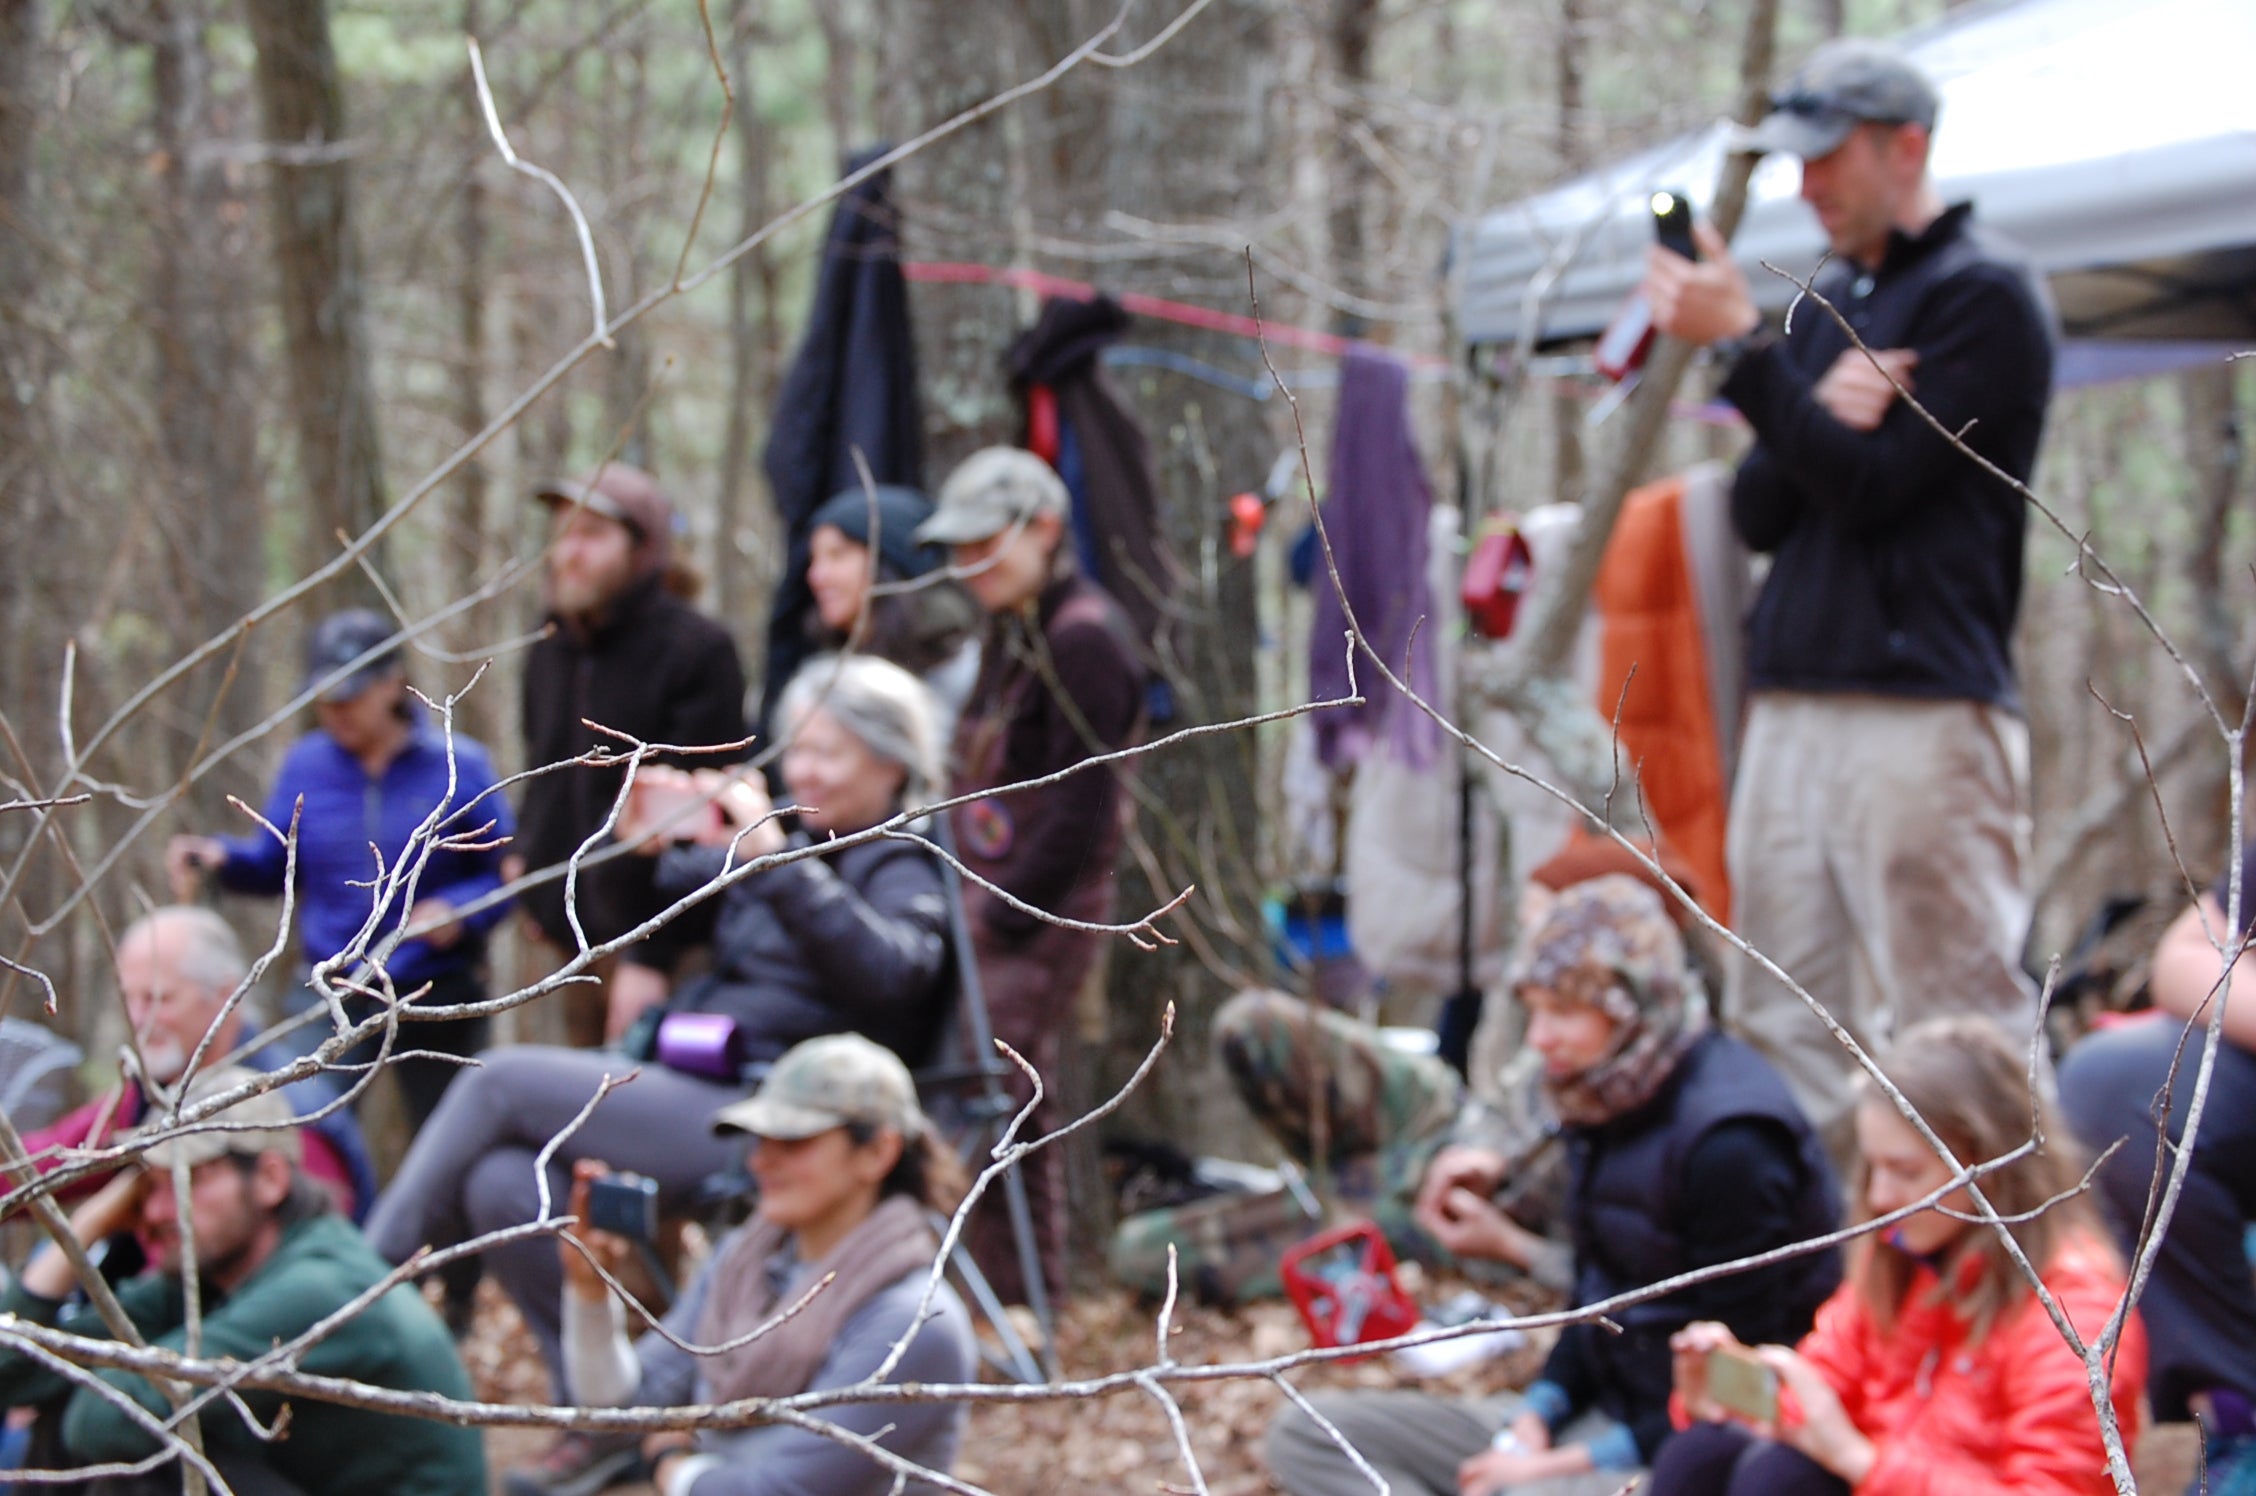 Supporters of the tree sitters camp out on Peters Mountain